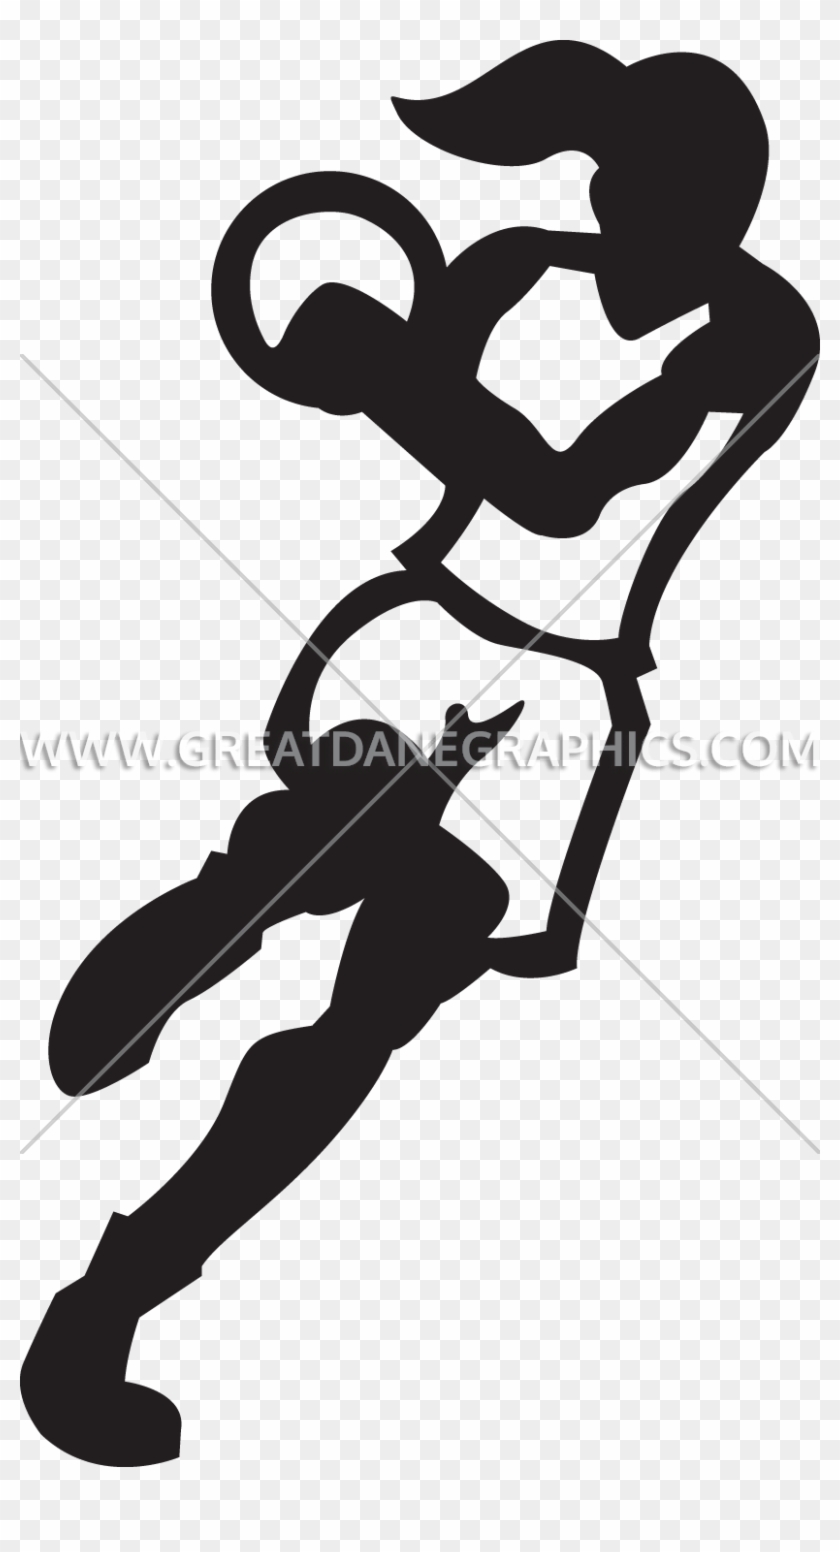 Female Basketball Player Silhouette At Getdrawings - Illustration #1442737